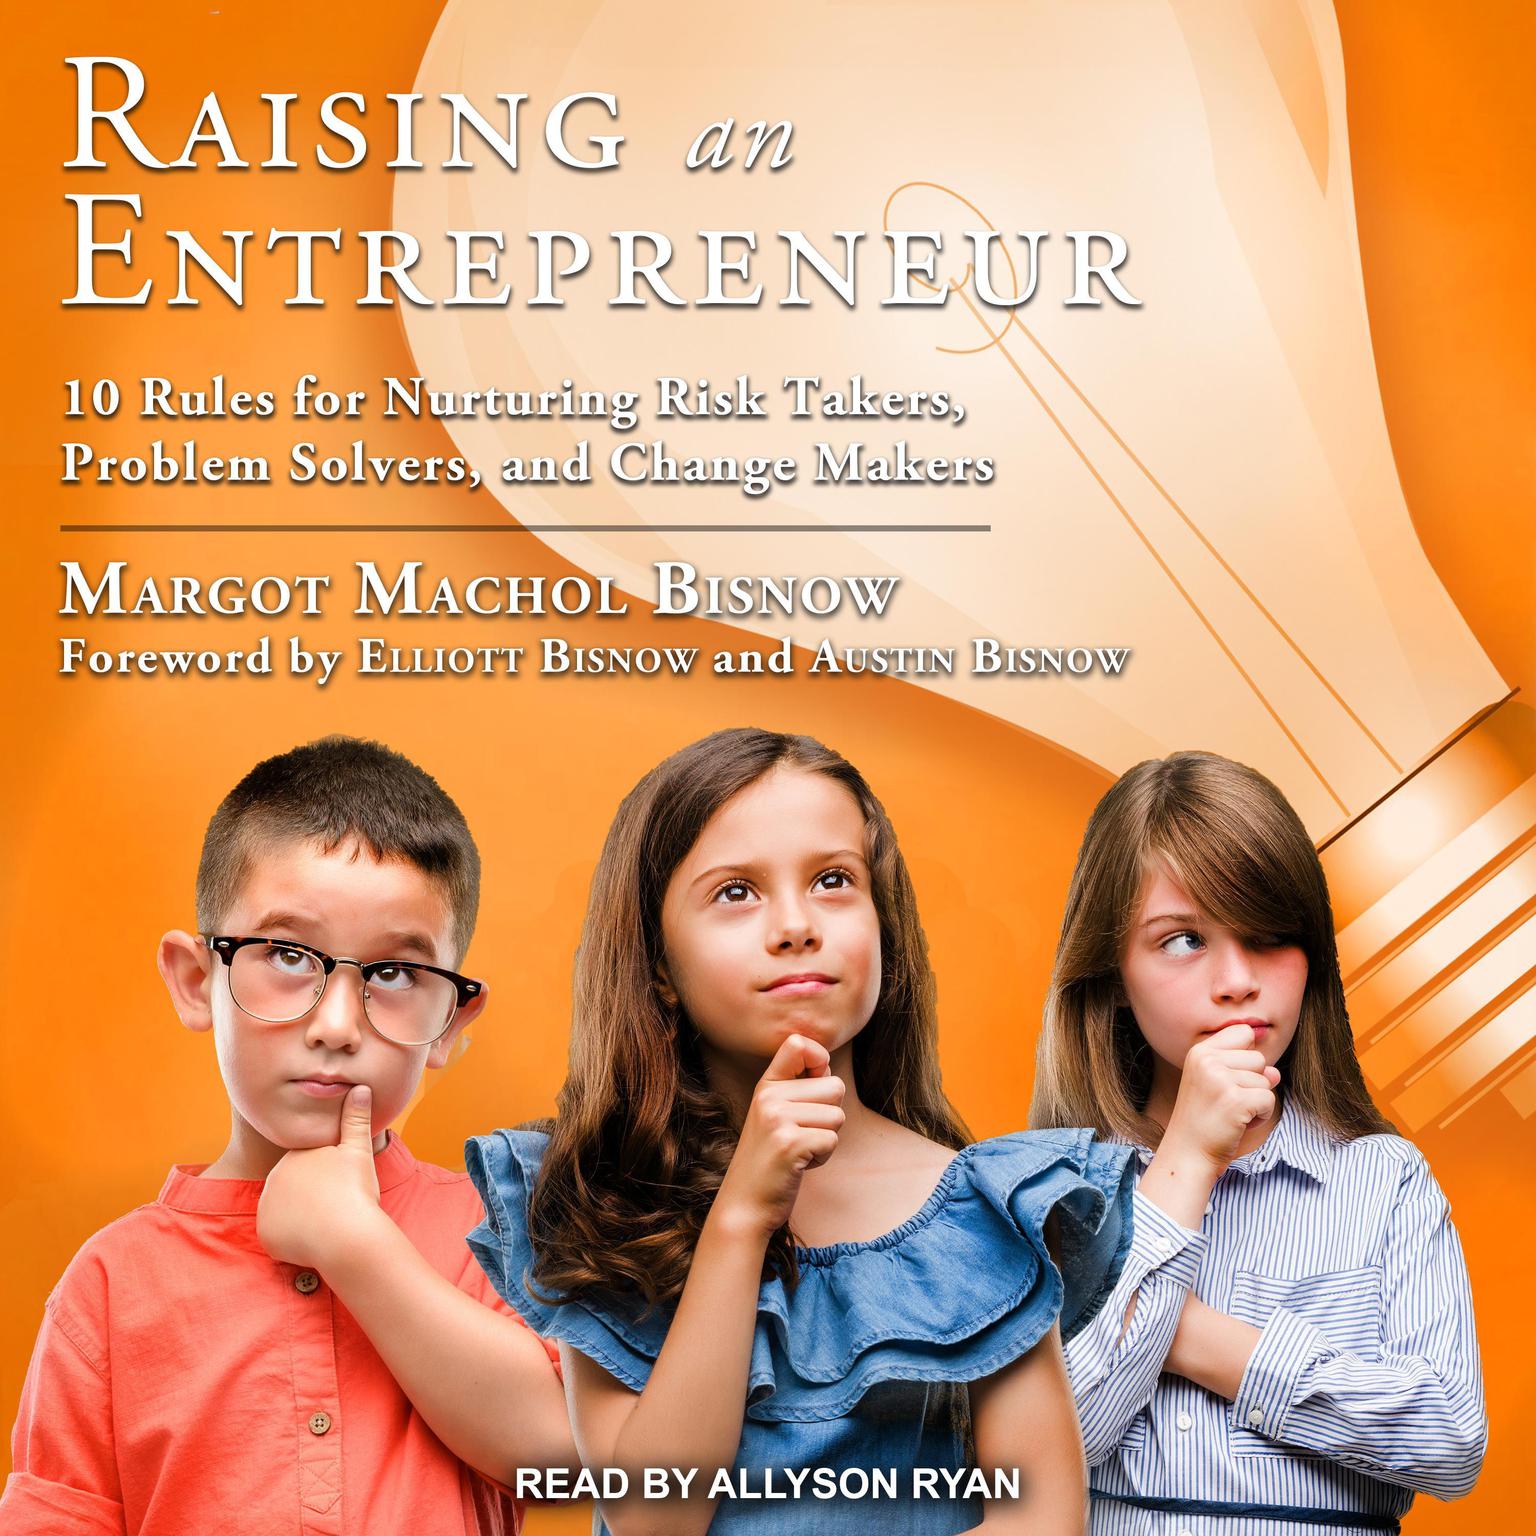 Raising an Entrepreneur: 10 Rules for Nurturing Risk Takers, Problem Solvers, and Change Makers Audiobook, by Margot Machol Bisnow